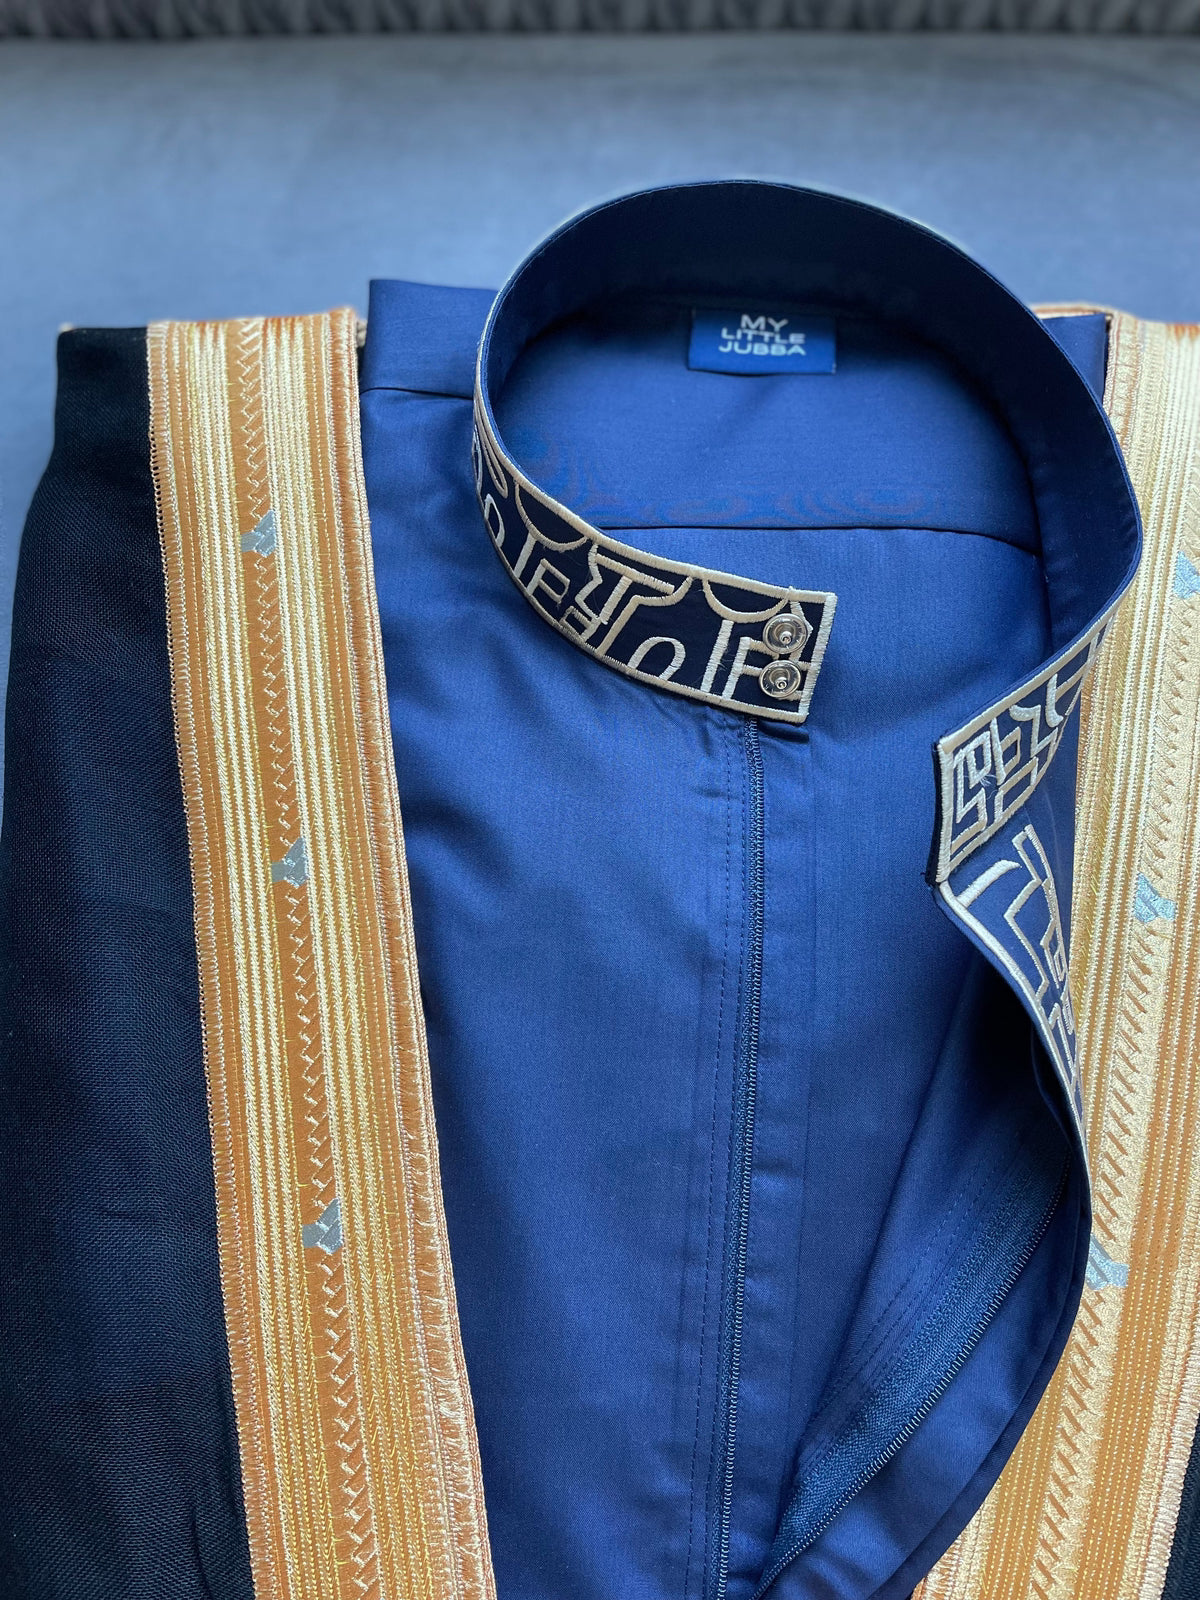 Mens Blue Thobe with Gold Embroidery 5 Pcs Set